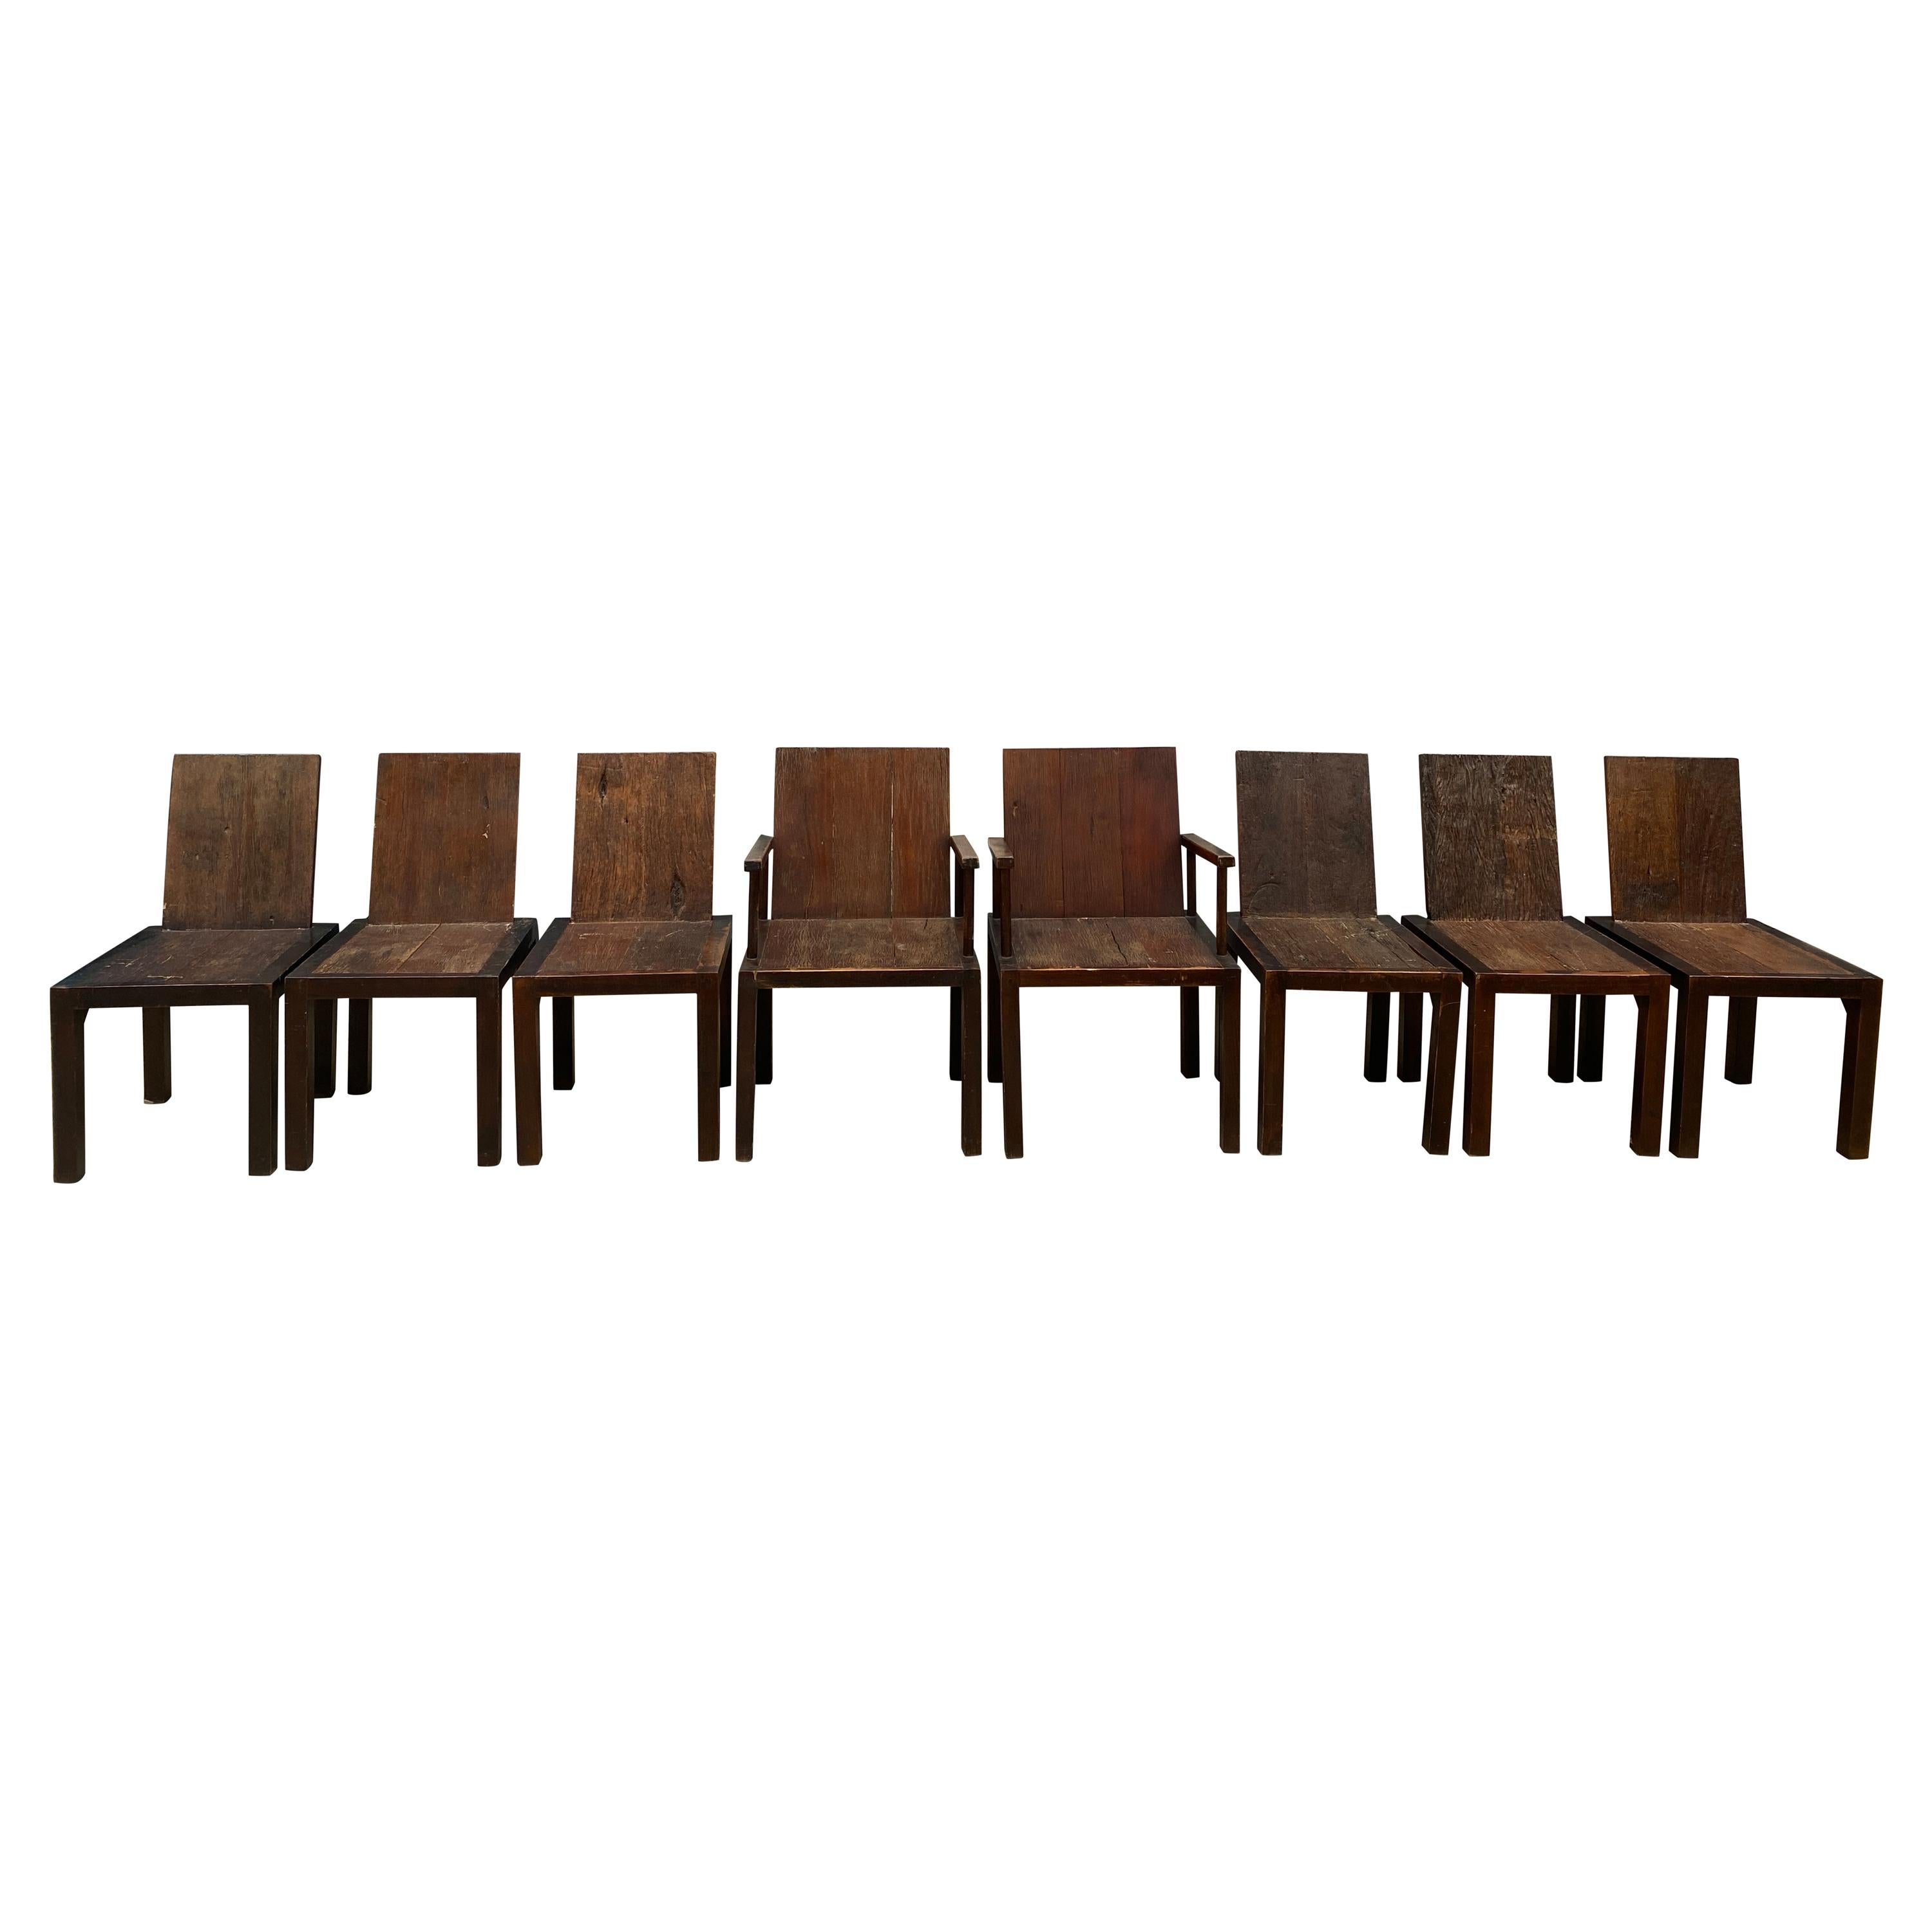 Set of 8 Modern Rustic Organic Dining Chairs Solid Wood with Butterfly Details